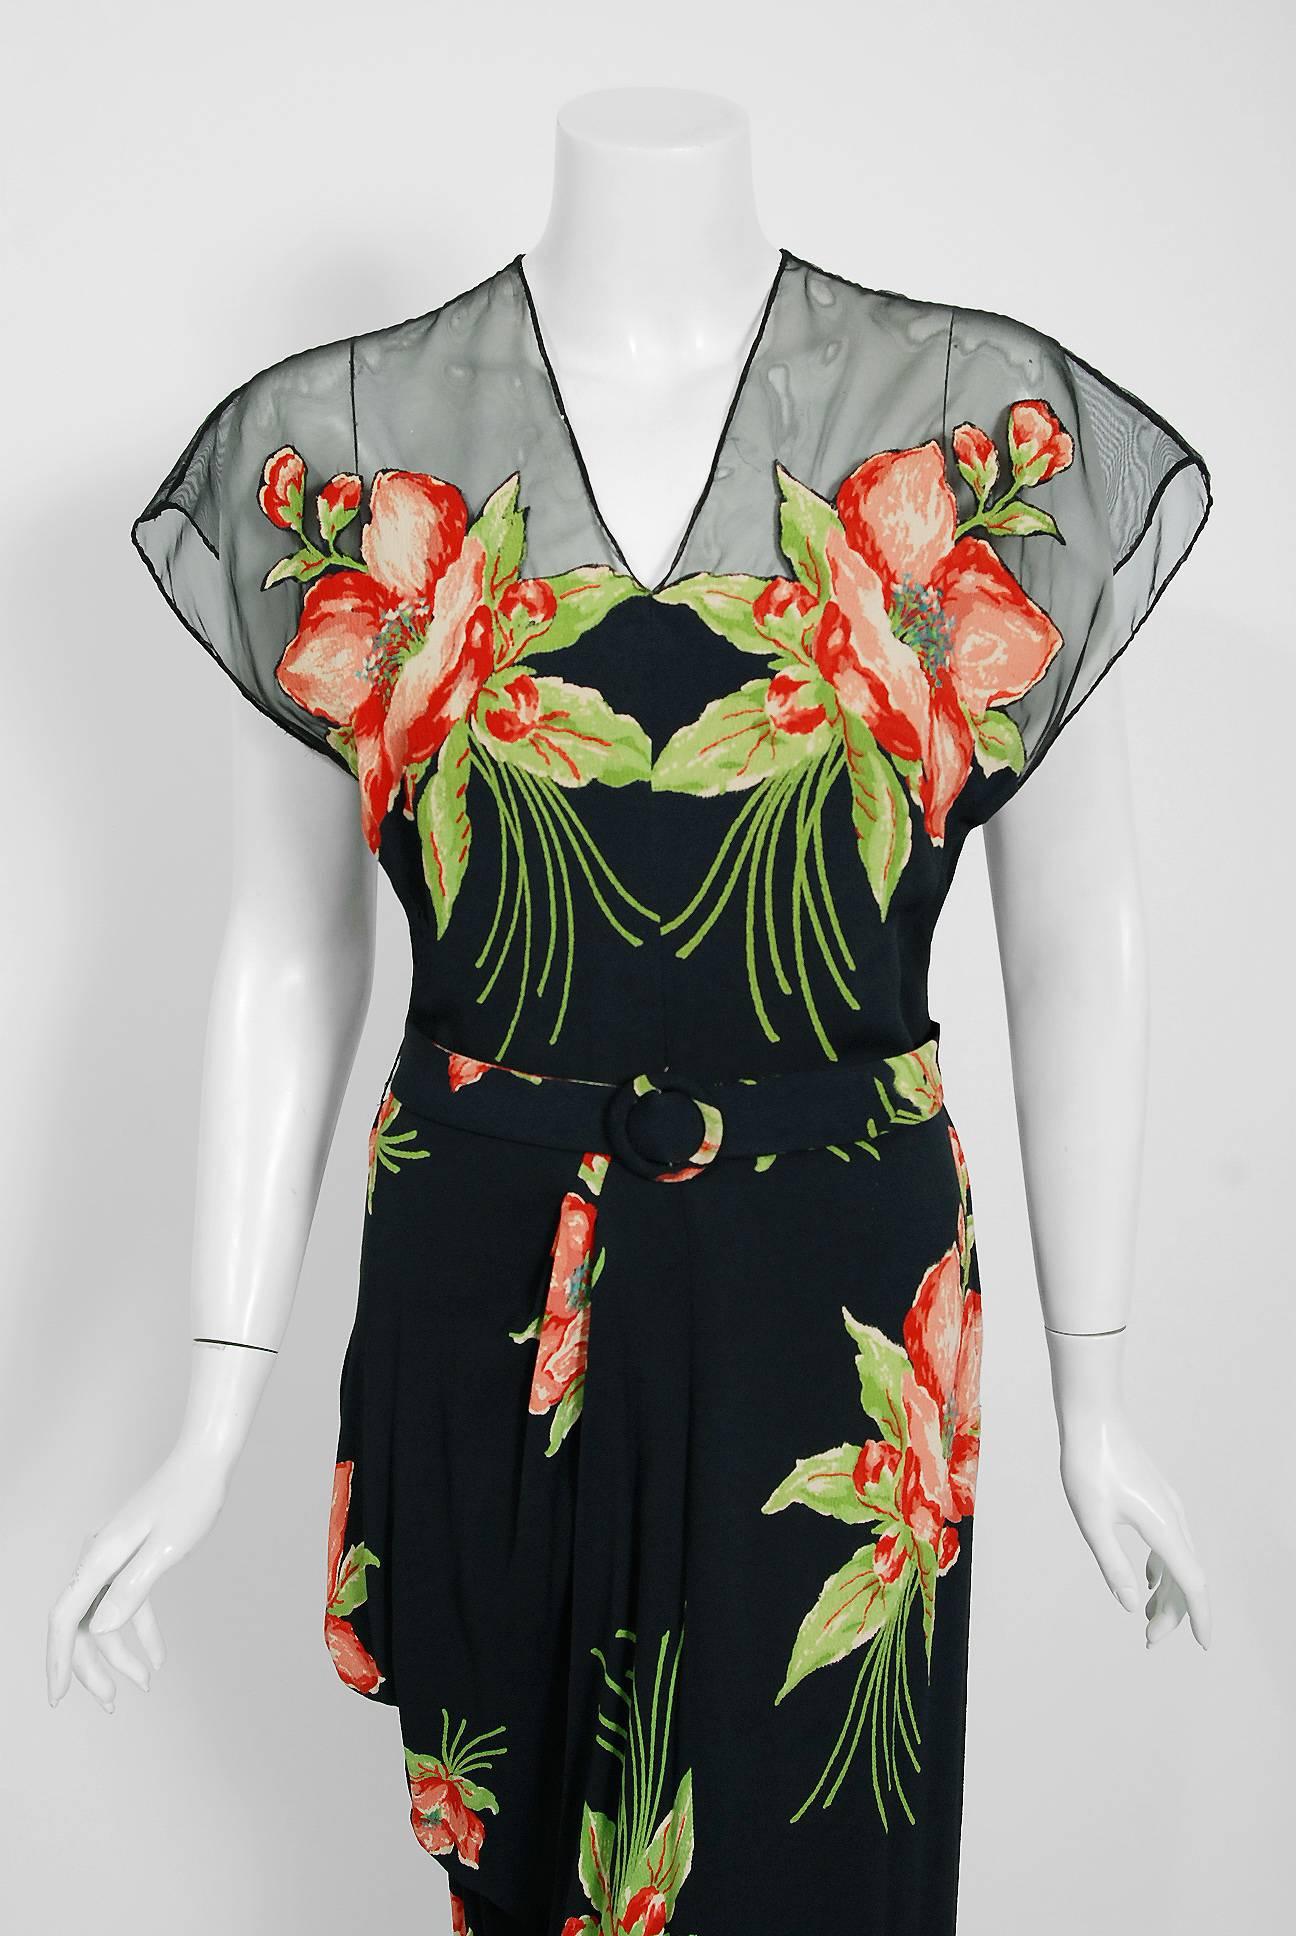 An amazing and highly stylized 1940's floral mid-weight silk gown by the 